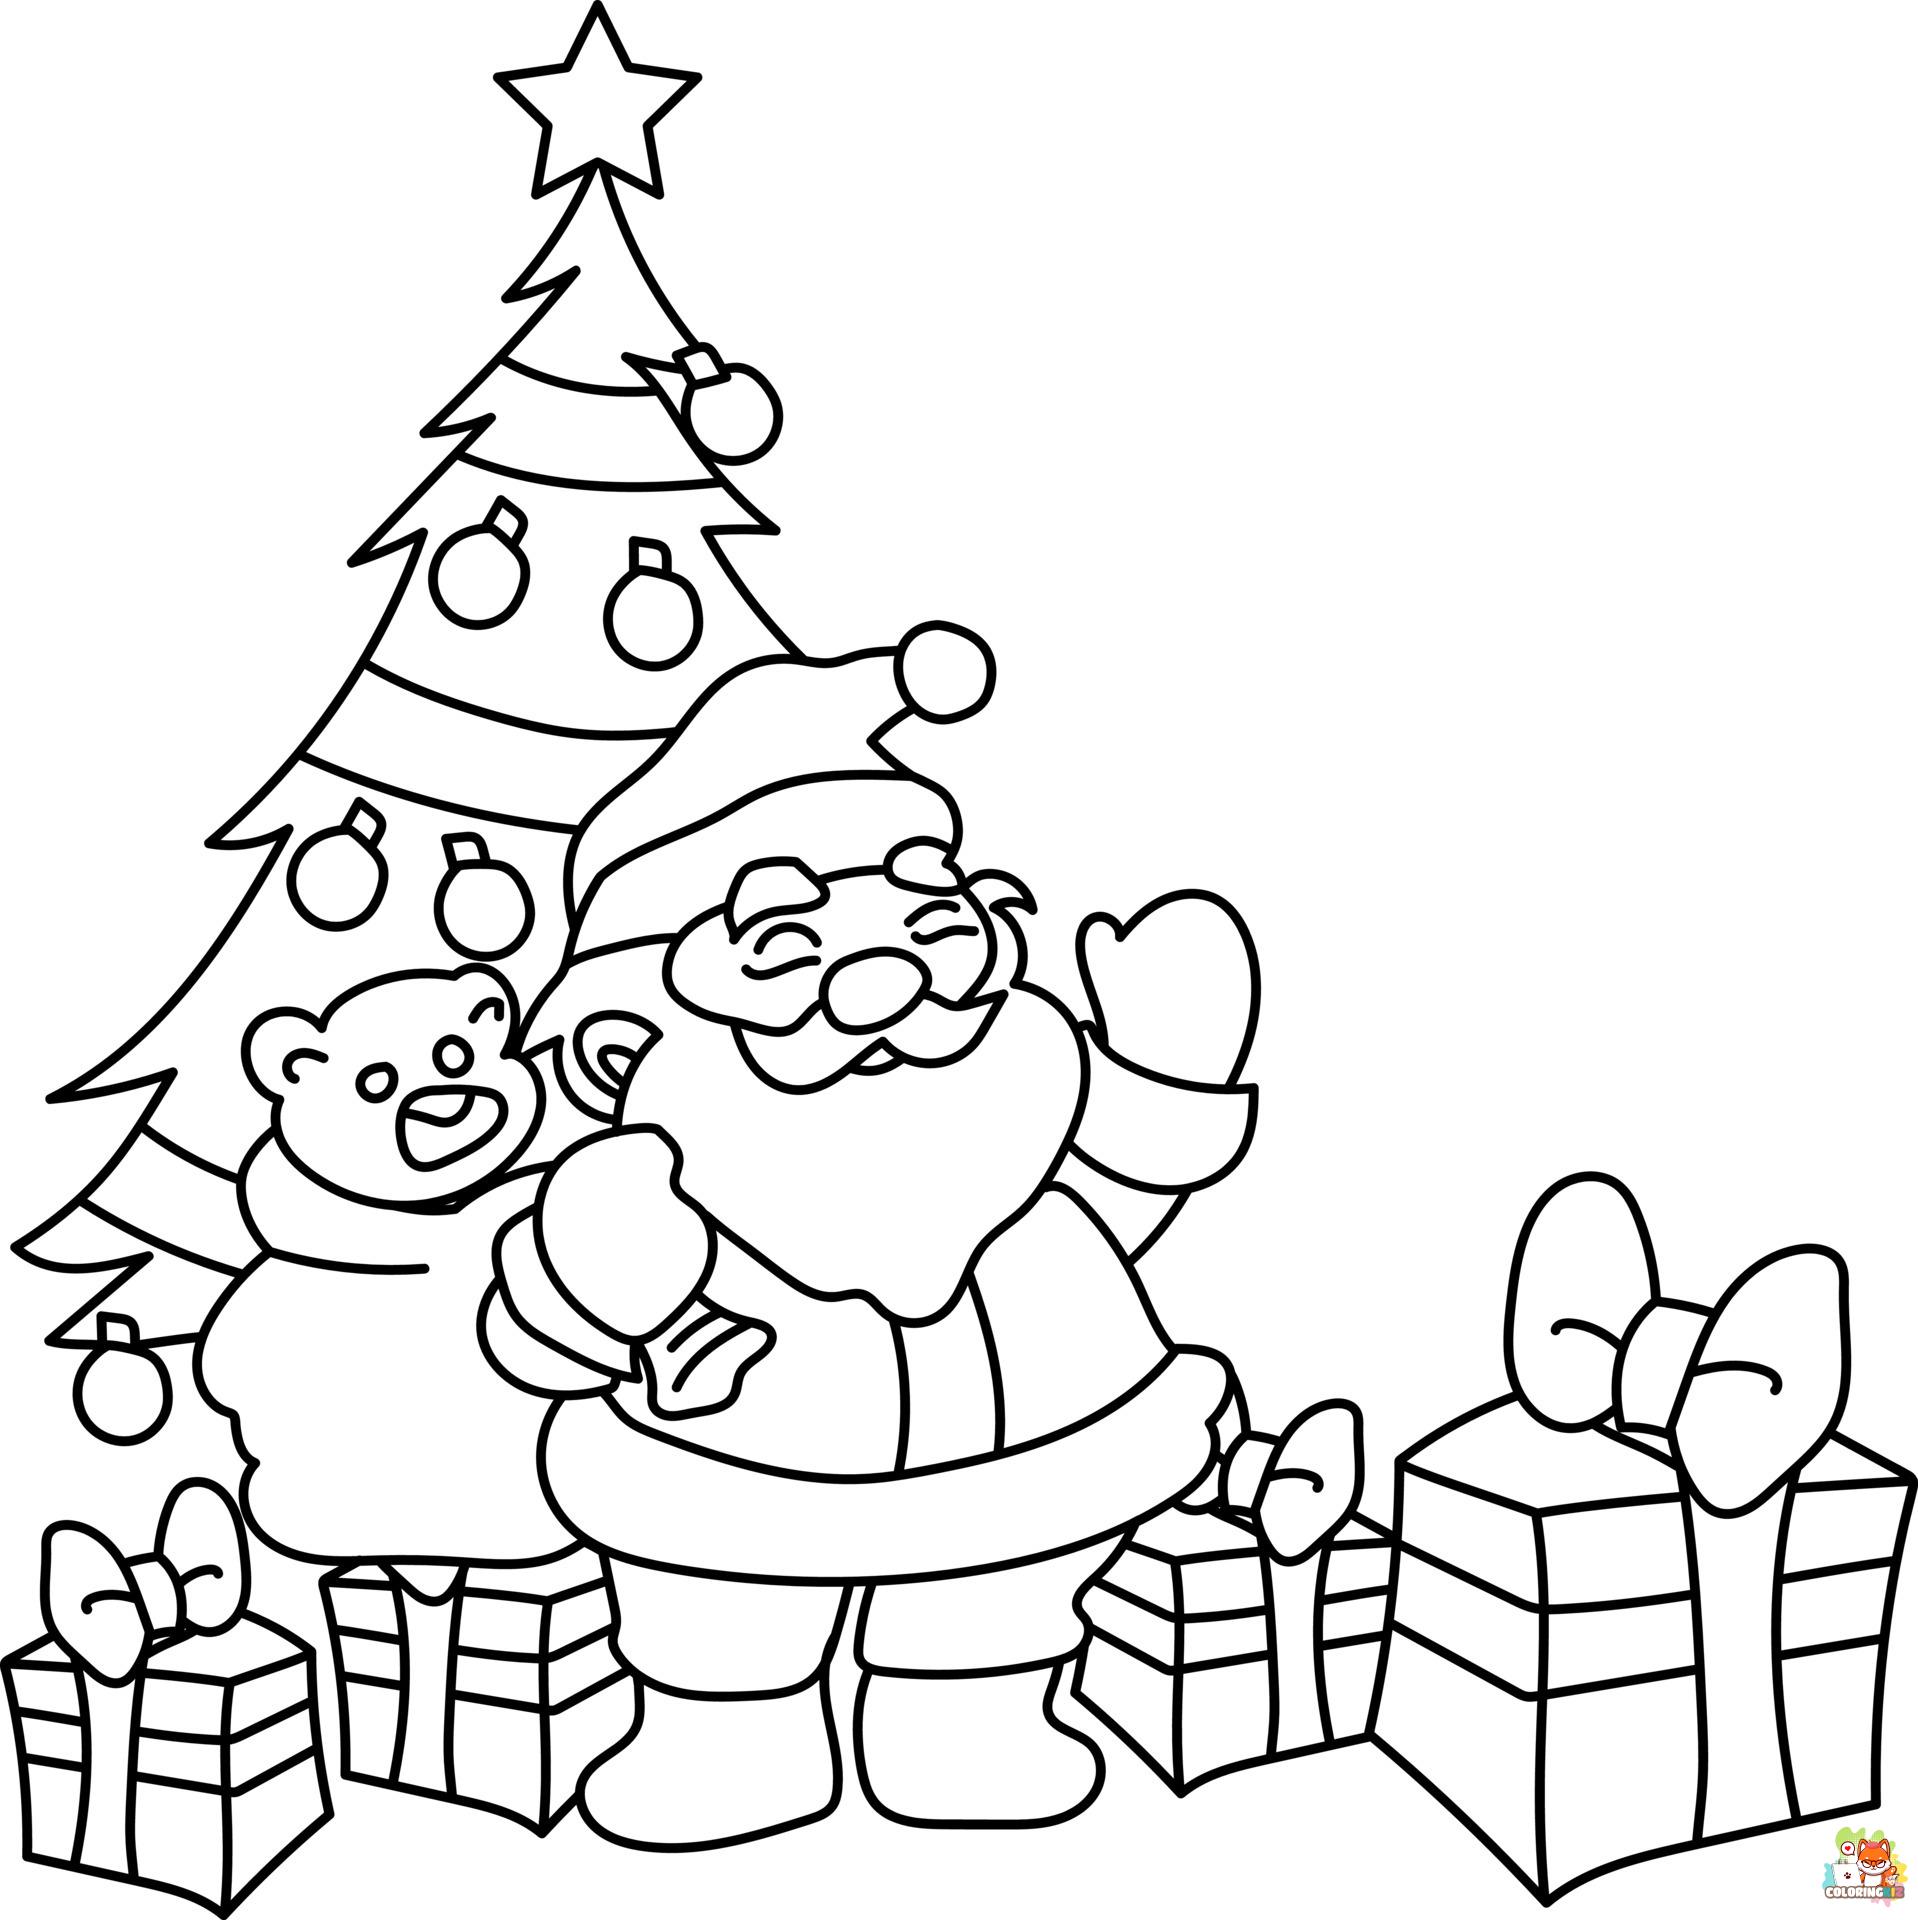 Christmas Tree Coloring Pages 9